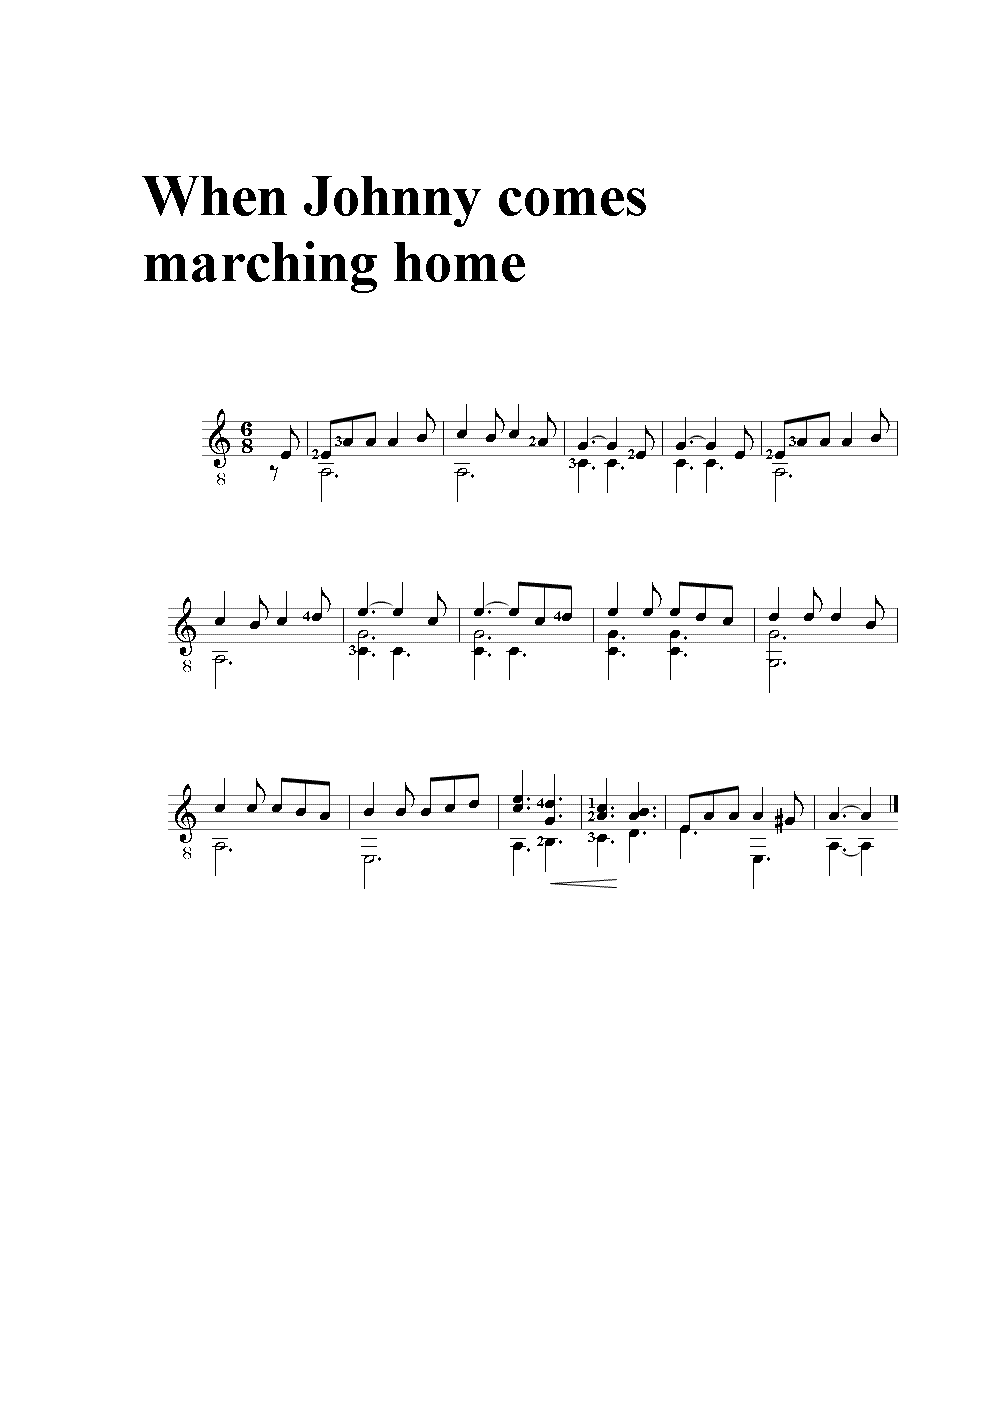 When Johnny comes marching home-1.gif